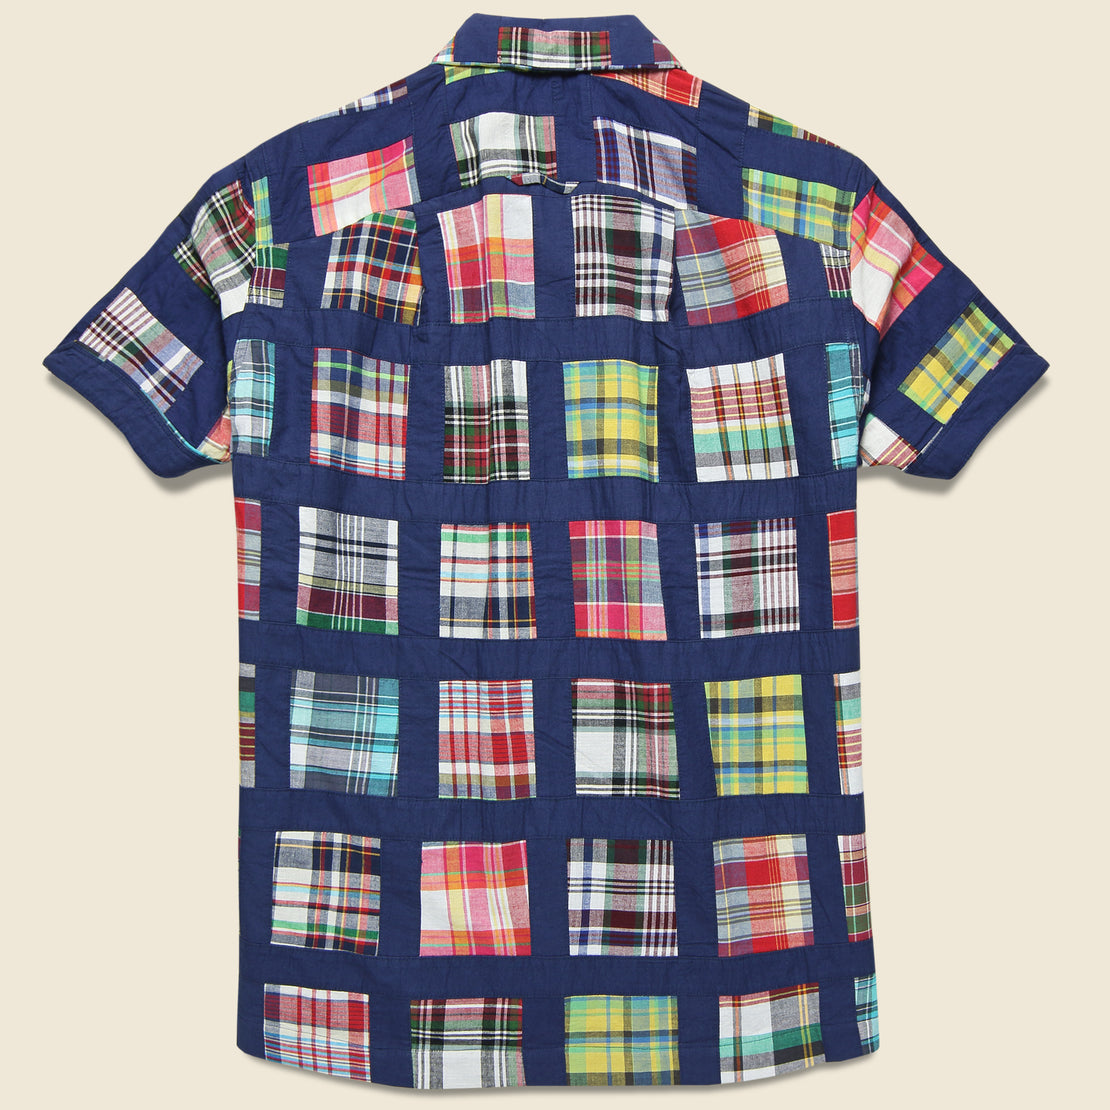 Patchwork Vacation Shirt - Navy Madras - Monitaly - STAG Provisions - Tops - S/S Woven - Other Pattern